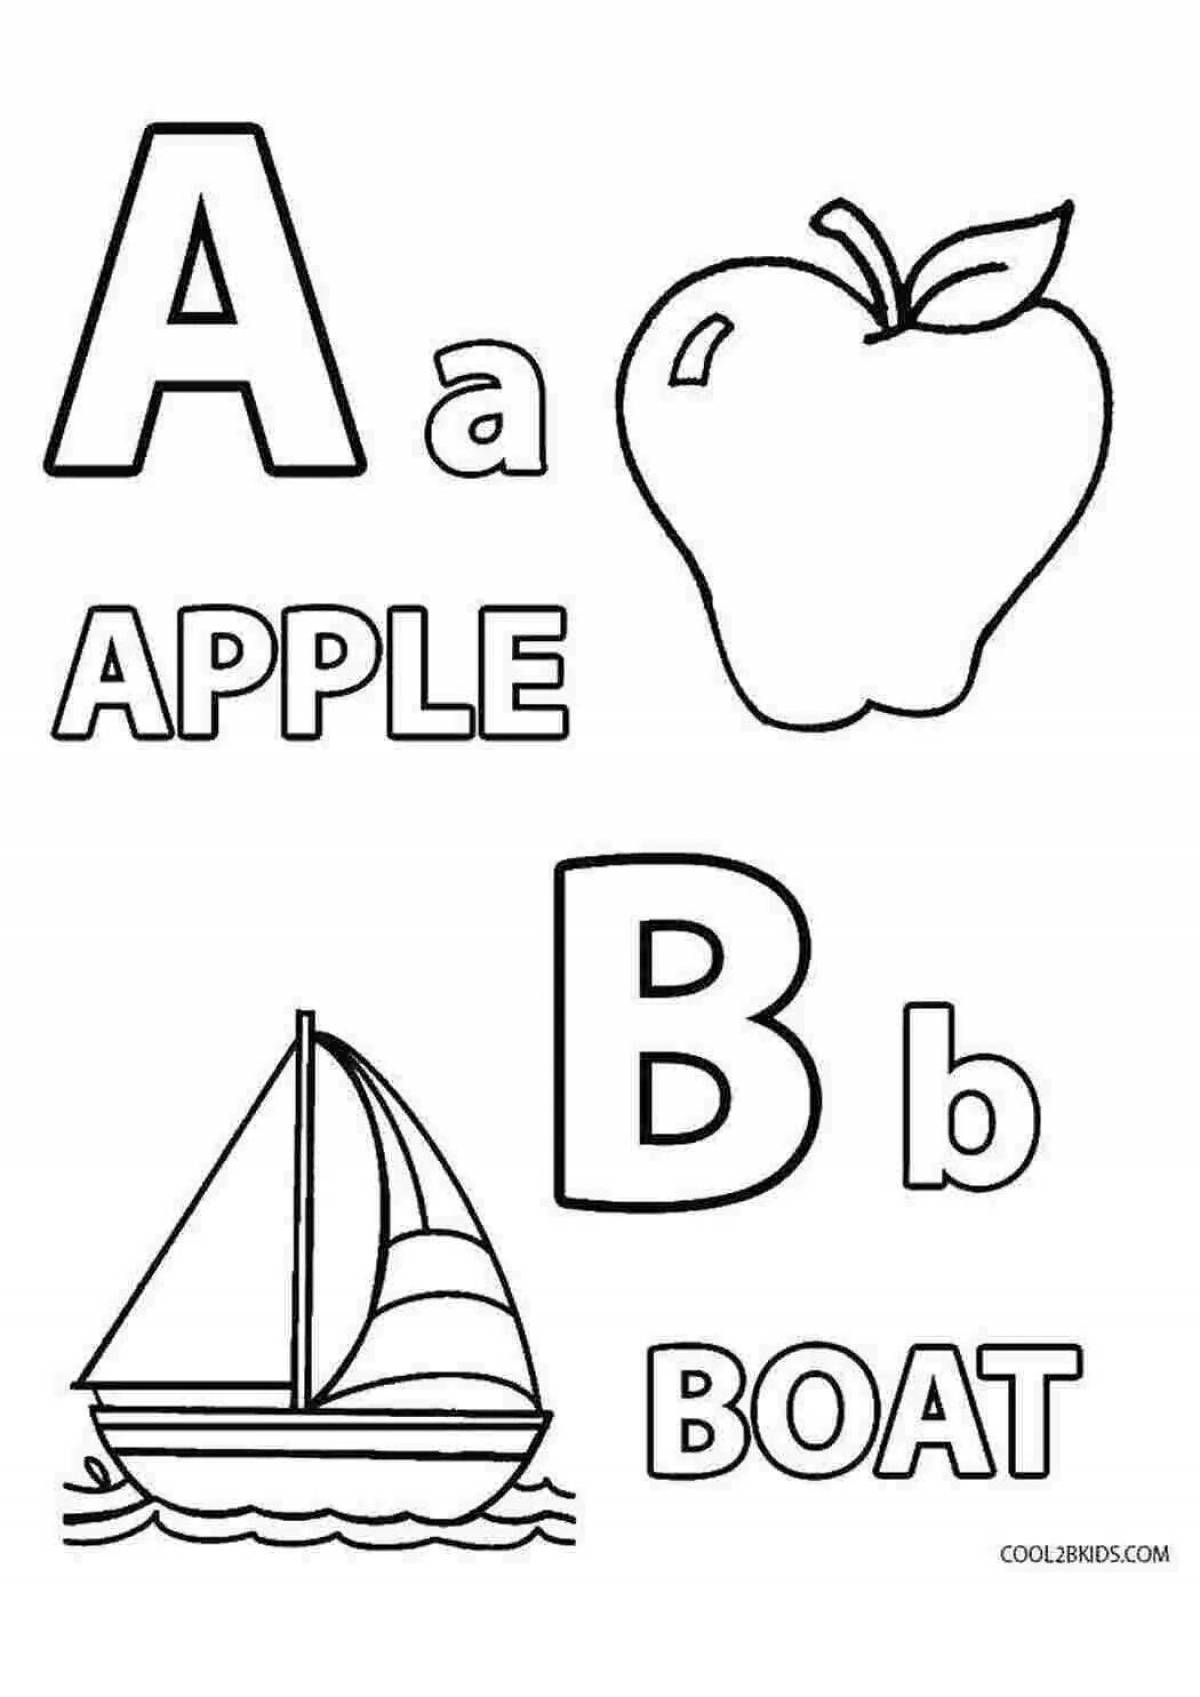 Fun coloring of the English alphabet for children